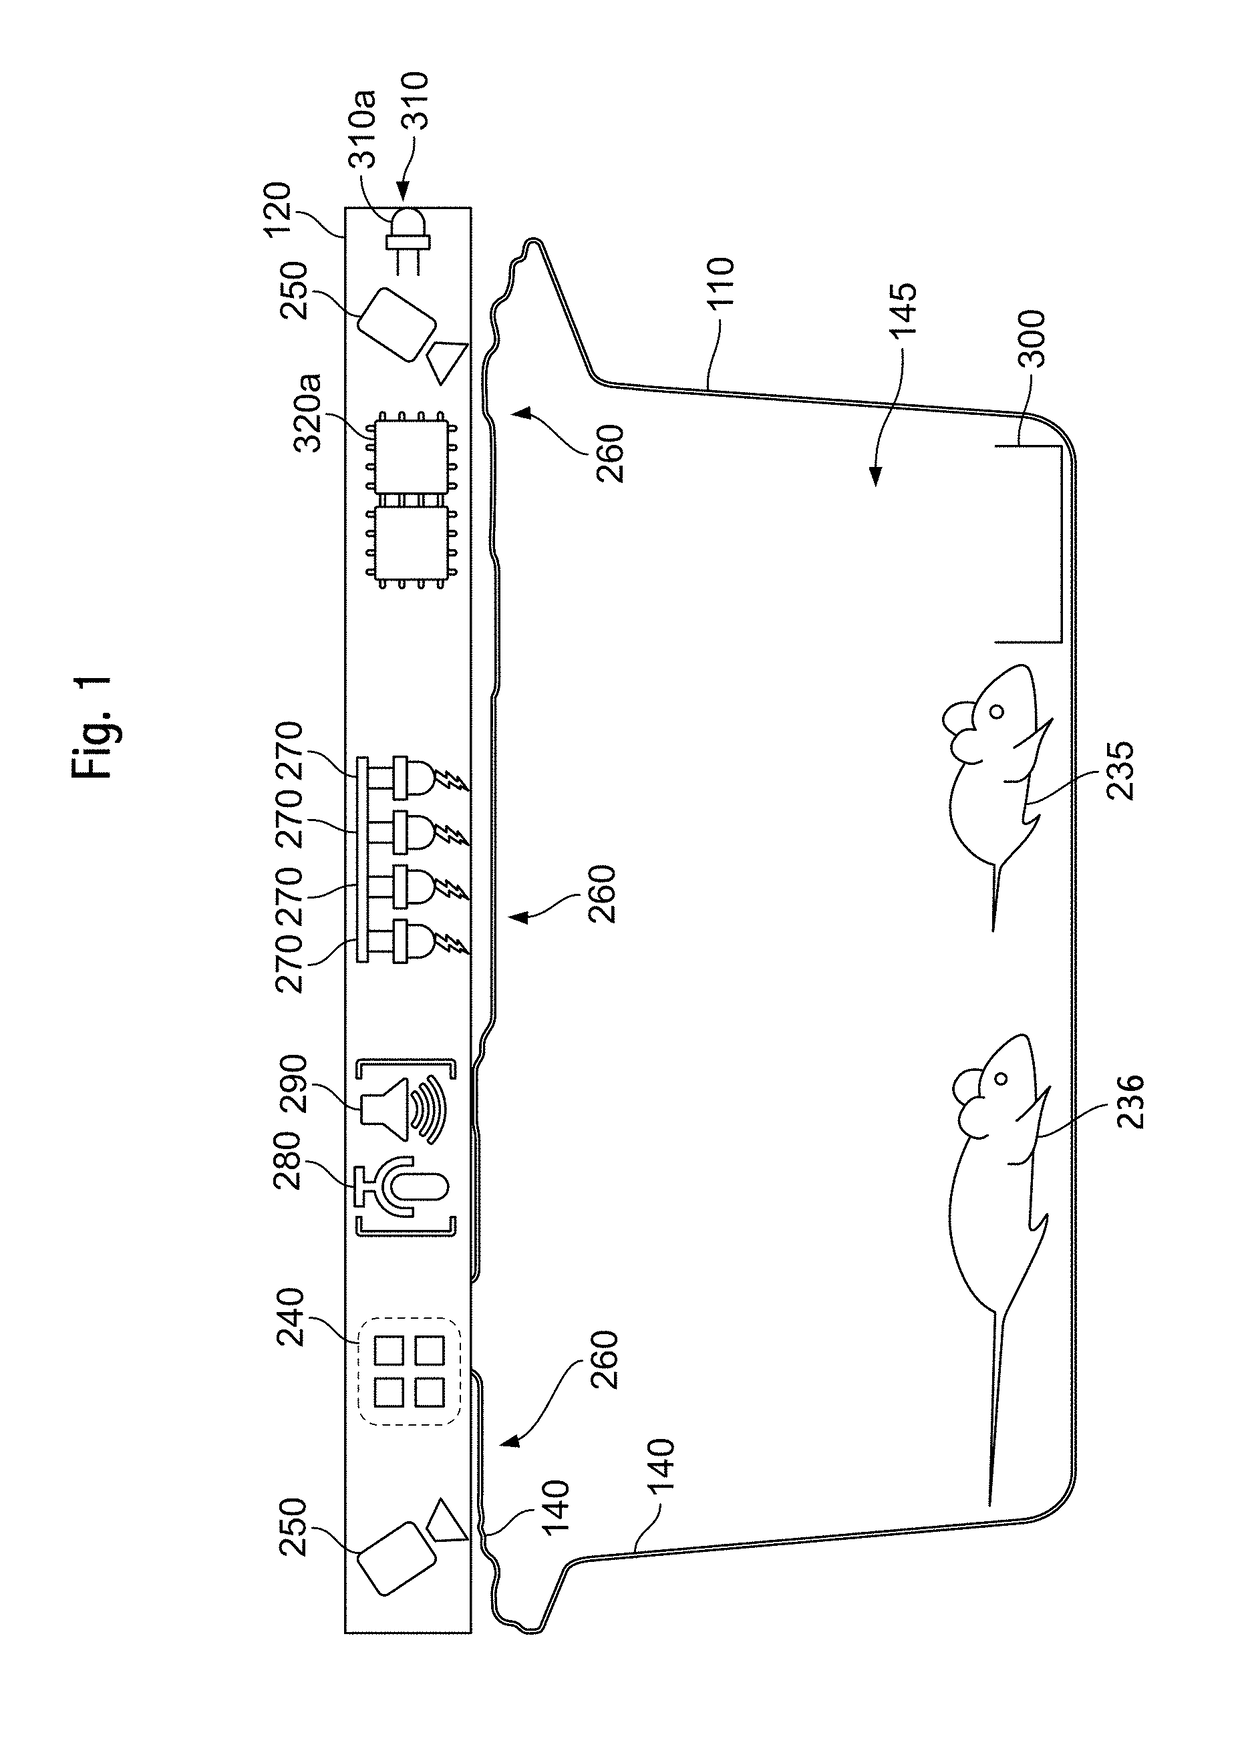 Device and method of using rodent vocalizations for automatic classification of animal behavior